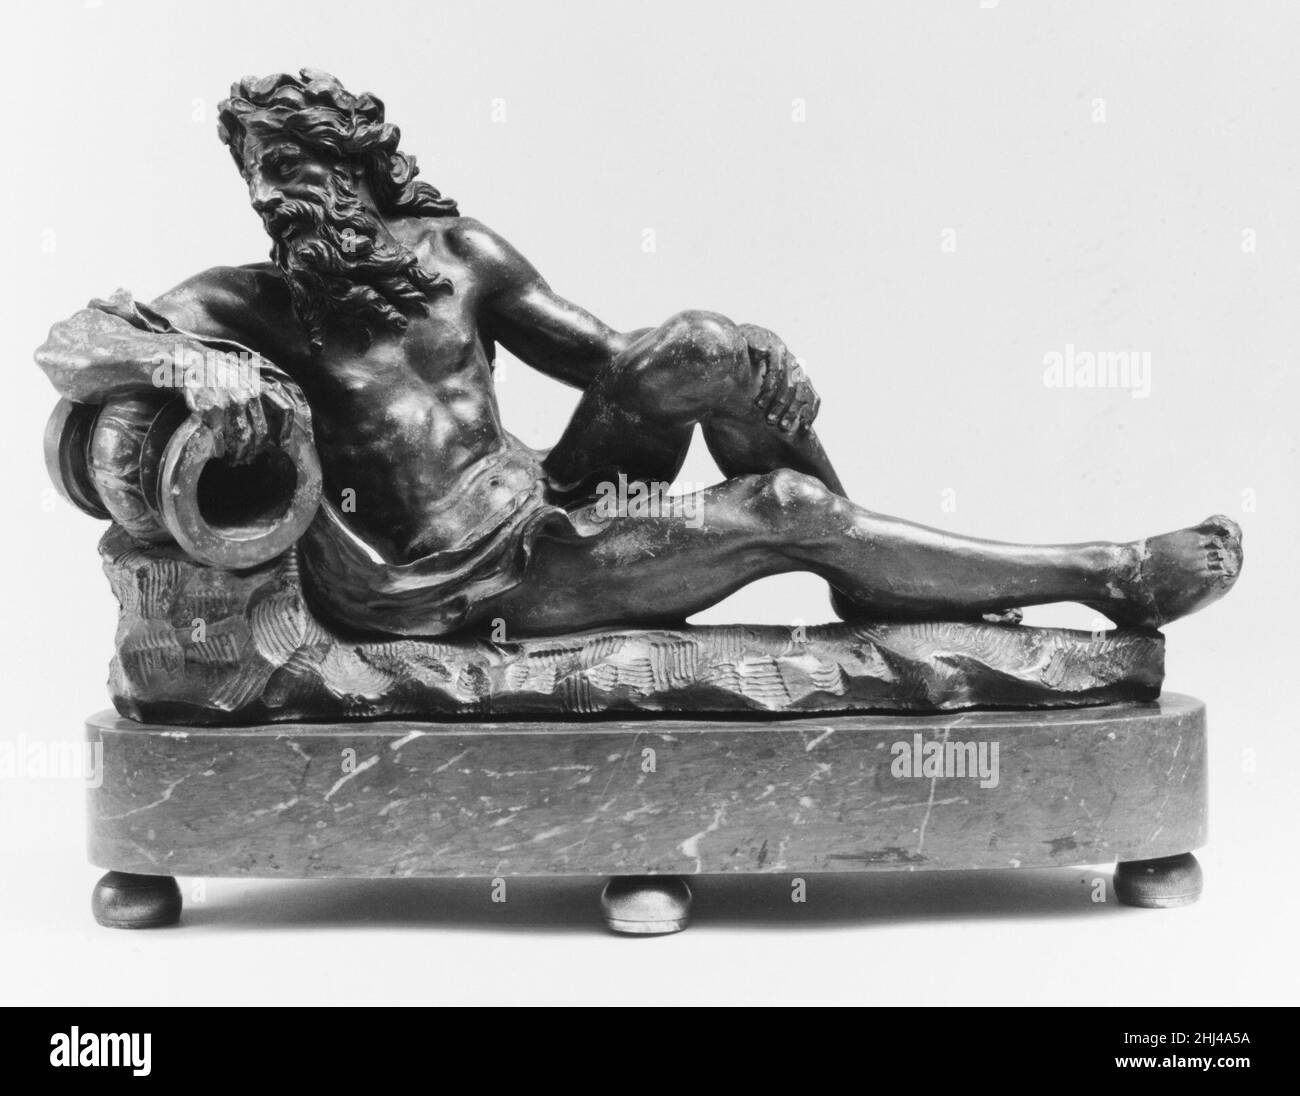 River God ca. 1700 probably Flemish This and another pendant Neptune (1973.184.2a, b) are models, probably for much larger garden figures. They are amusingly distorted imitations of types current in French baroque classicism, in the manner of Girardon and Coysevox but gone awry.. River God  205516 Stock Photo